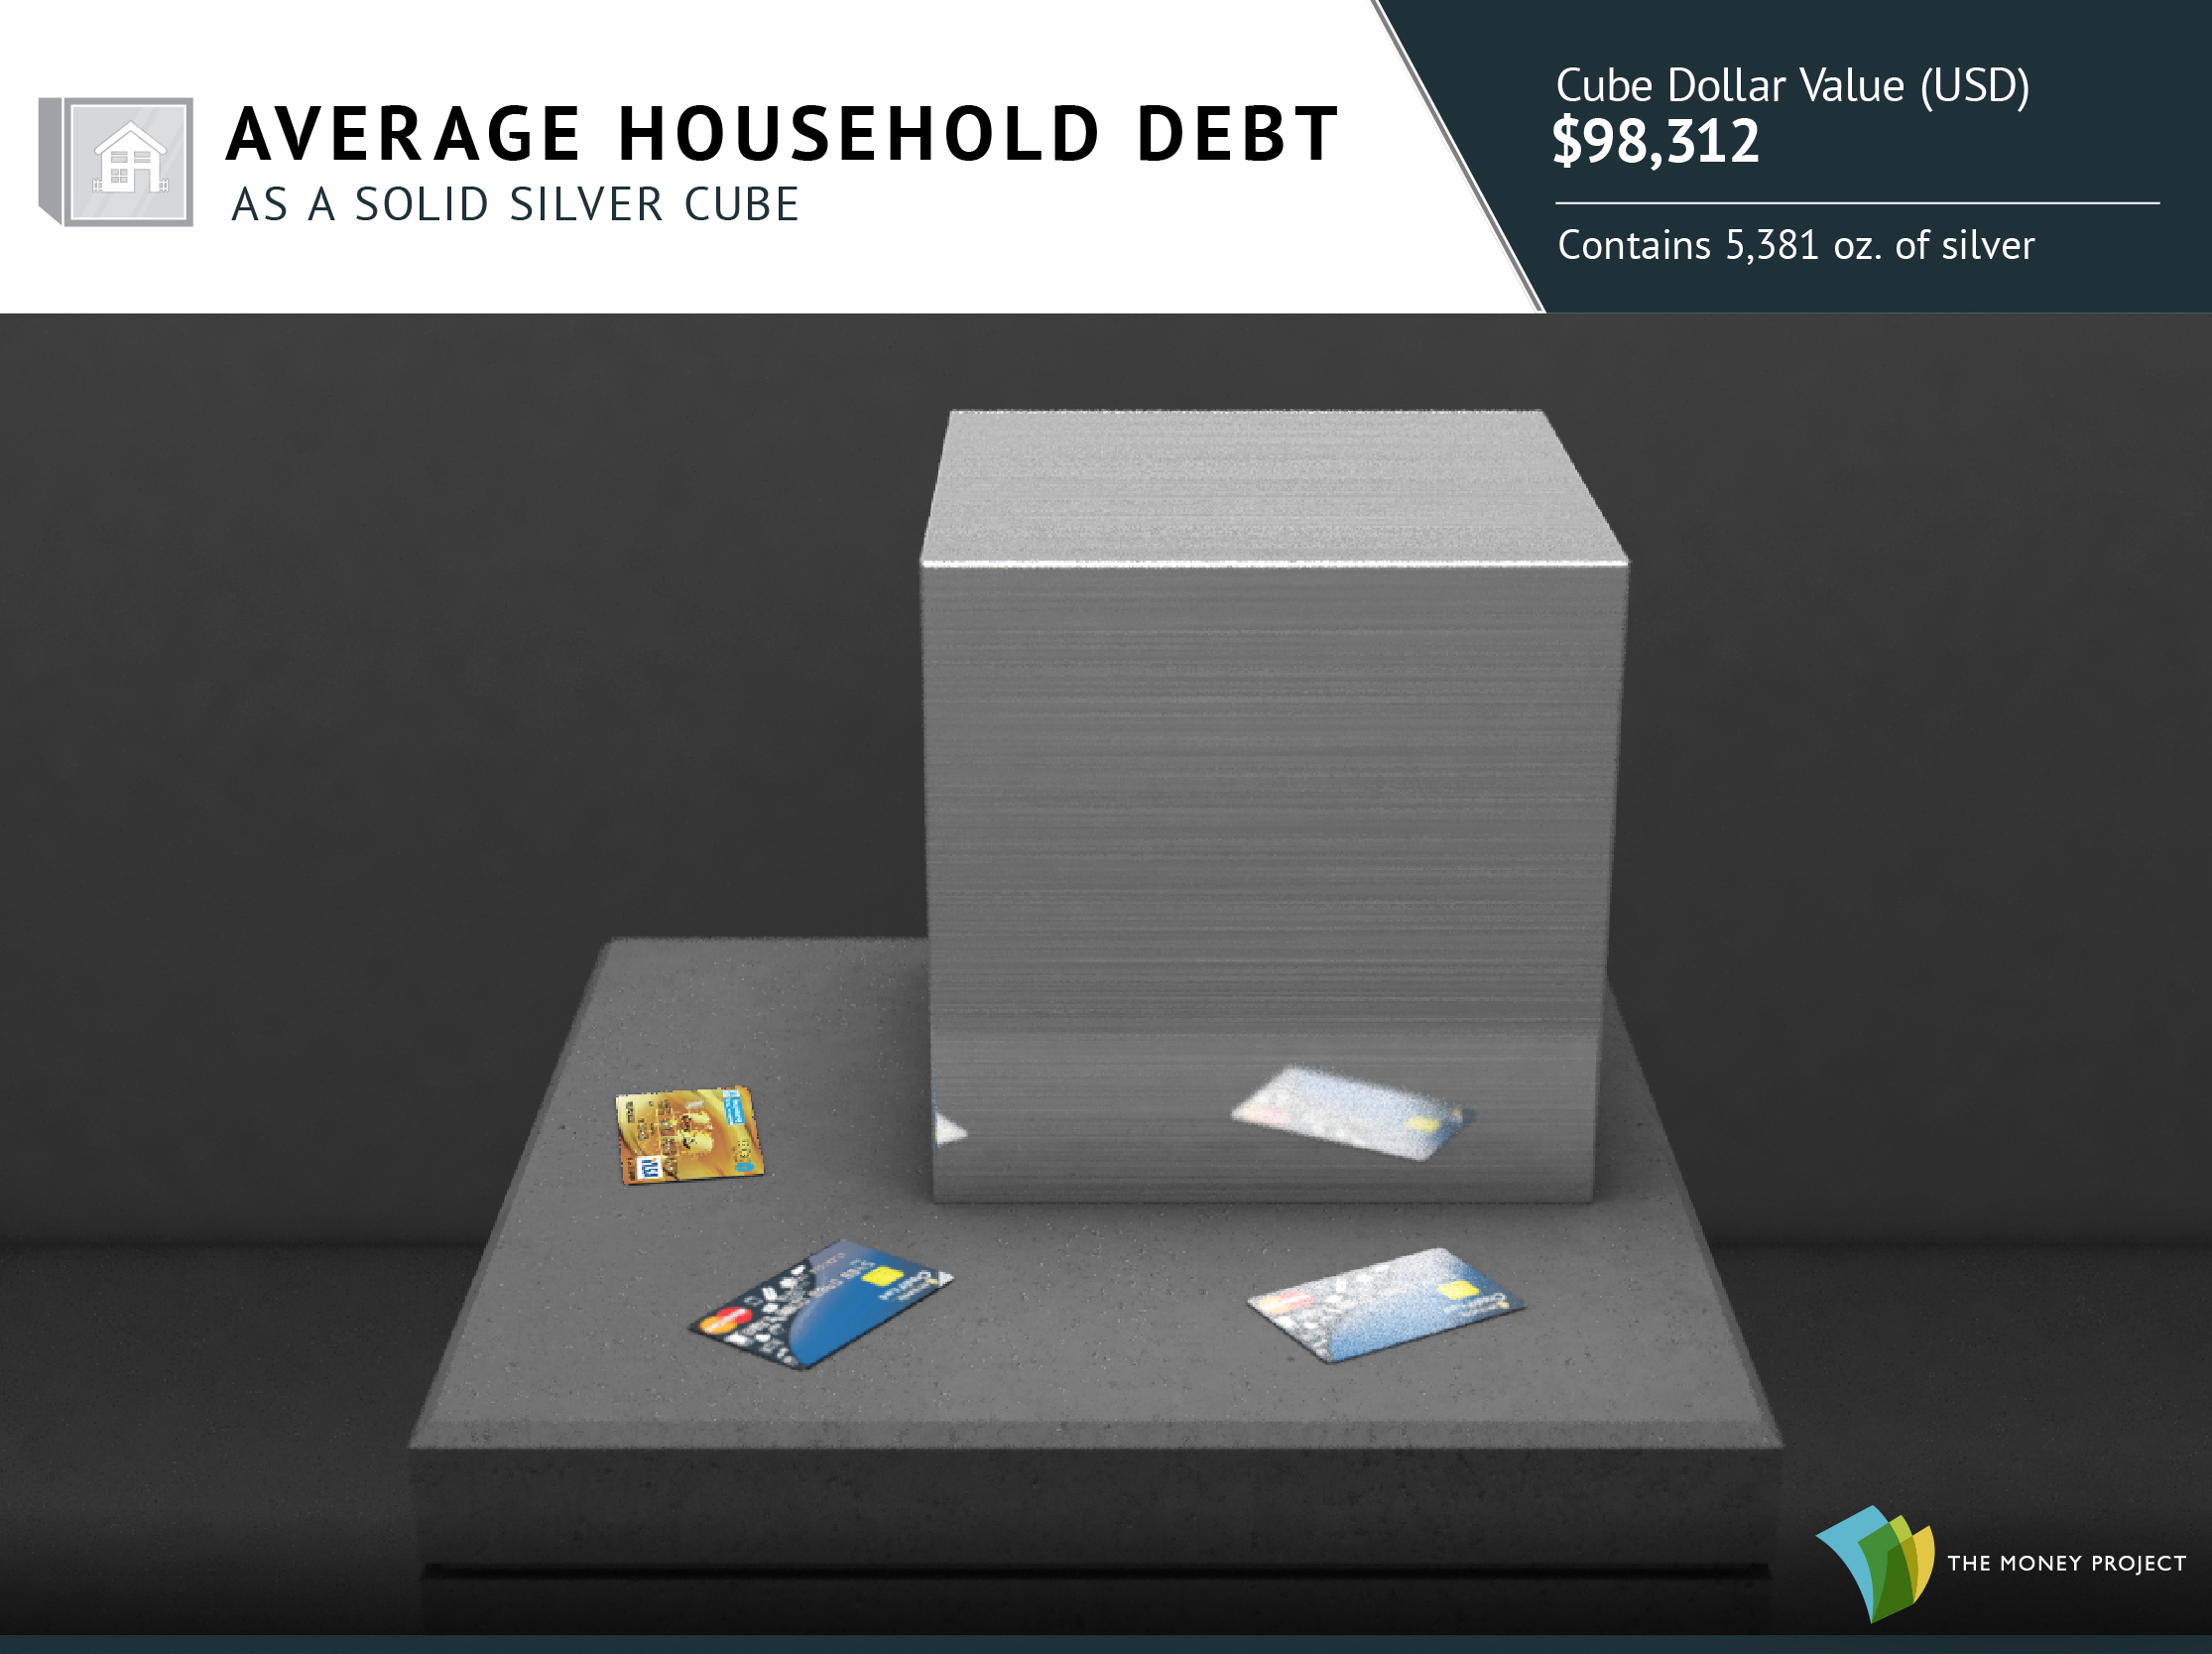 Average household debt as a silver cube